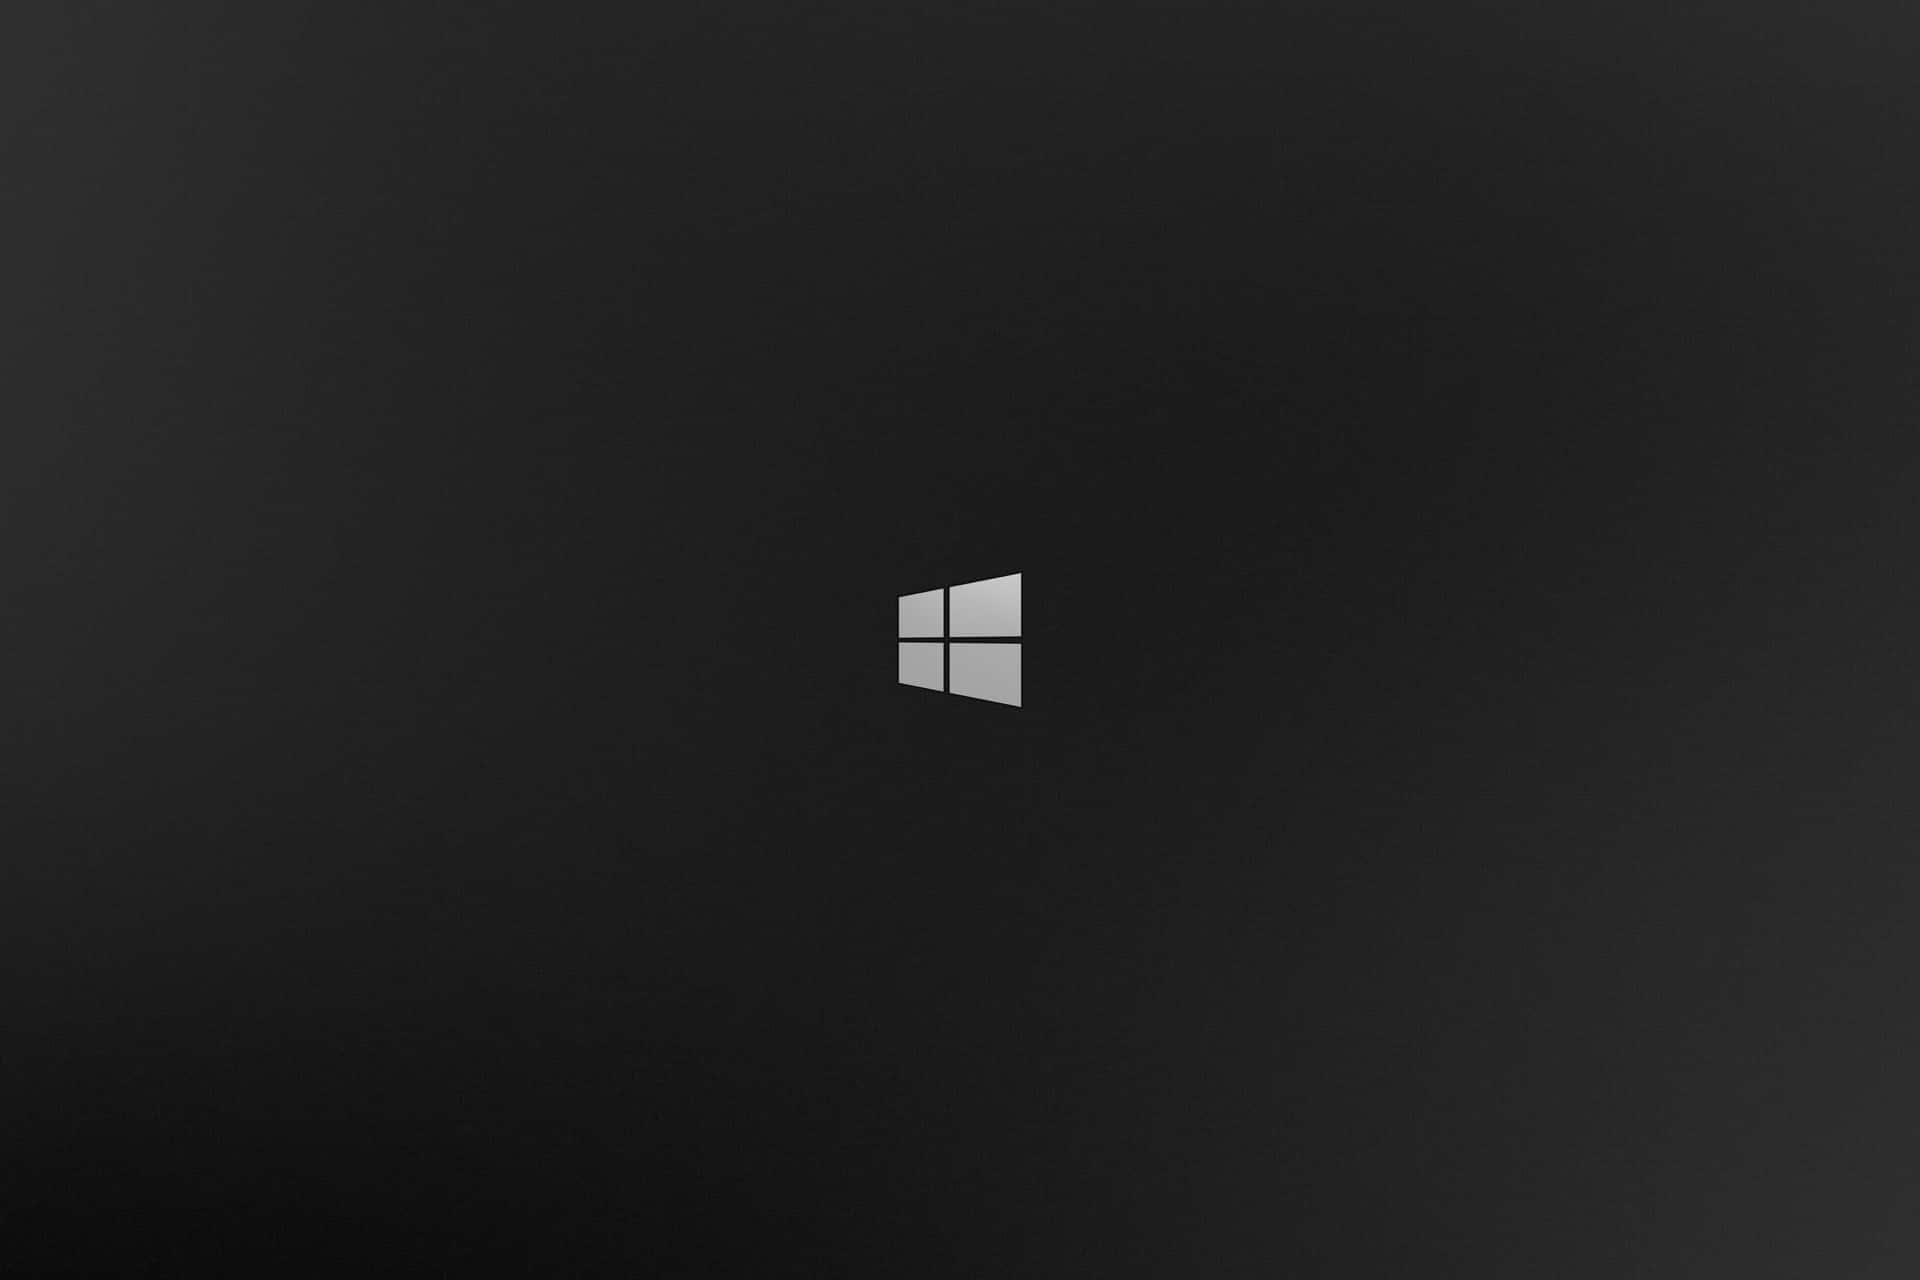 This is the Windows 1 user interface Wallpaper